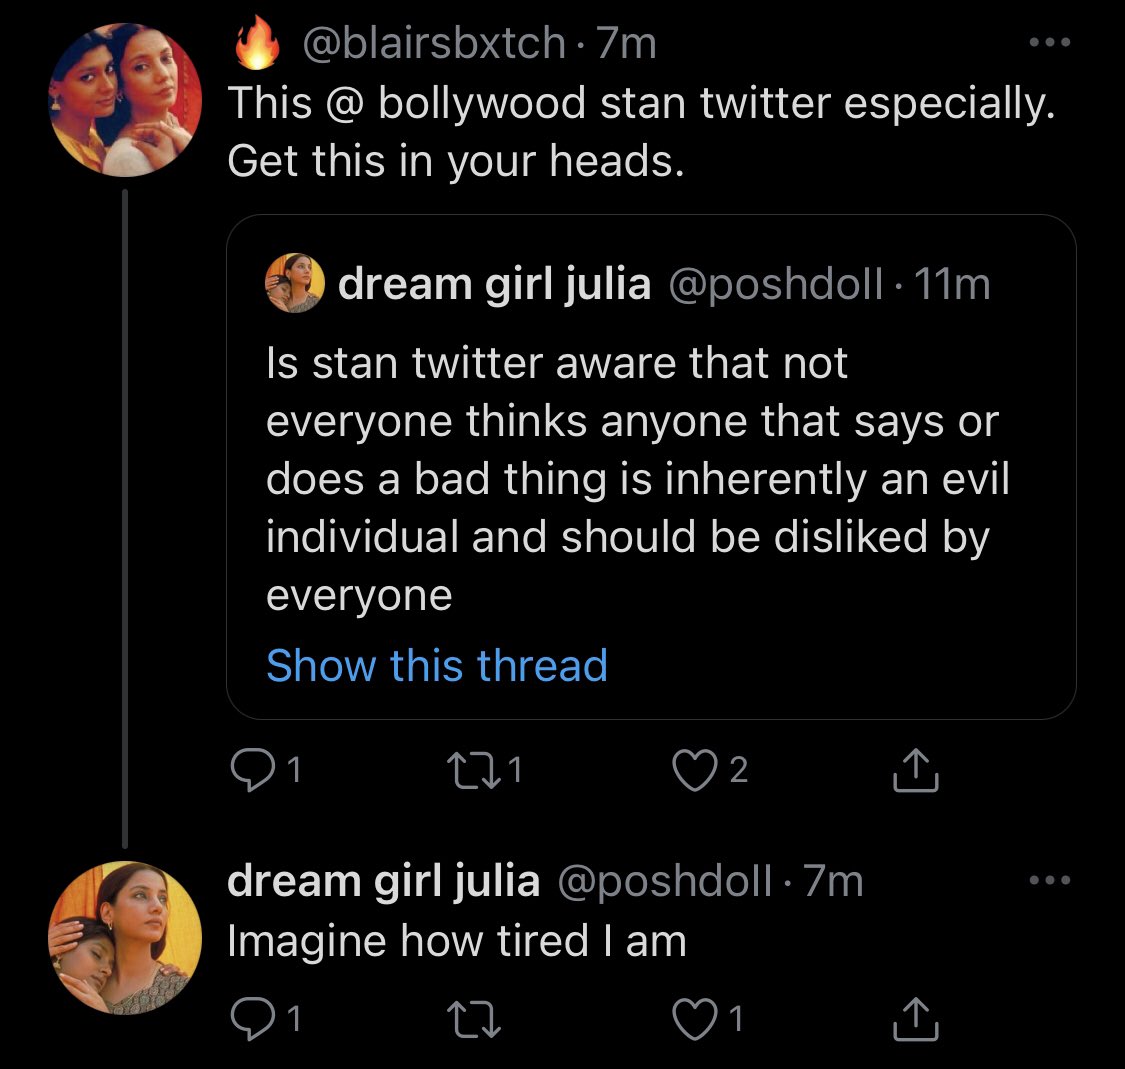 Once I asked her what she meant & what was this other account blocked by many, she responded in a cheeky way & deactivated. After calling her out, mutuals of mine let me know that she was talking about me on another account. I opened up the account just so I could block her & +